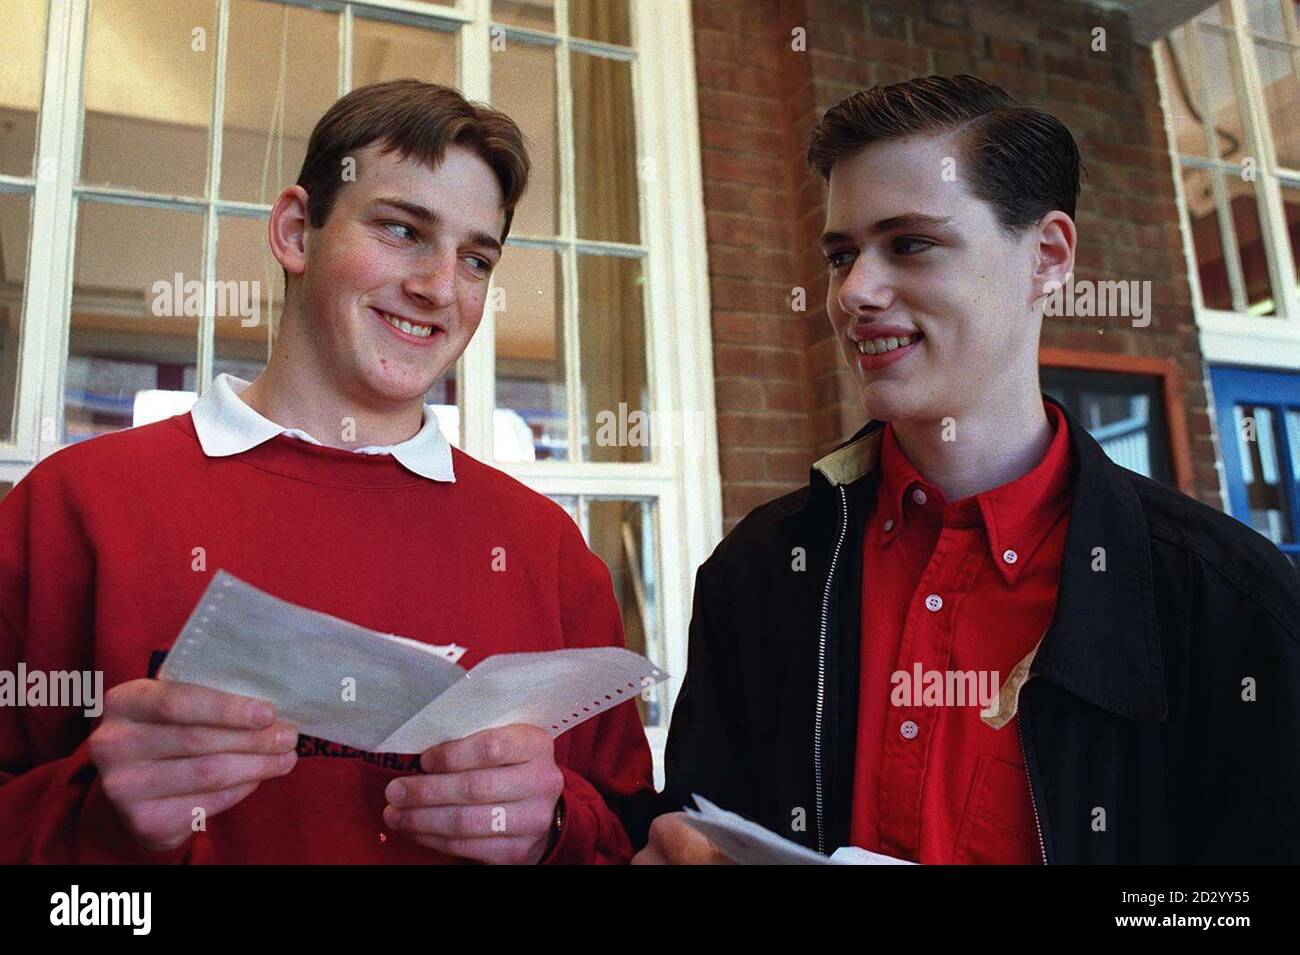 PICTURE BY HADYN IBALL - CHESTER CHRONICLE NEWSPAPERS. PICTURE No 6022H14 Glendon Salter from Bromborough and Thomas Phillips from Birkenhead, who passed TEN GCSE grade A examinations at Wirral Grammar School. See PA story EDUCATION GCSE. Stock Photo